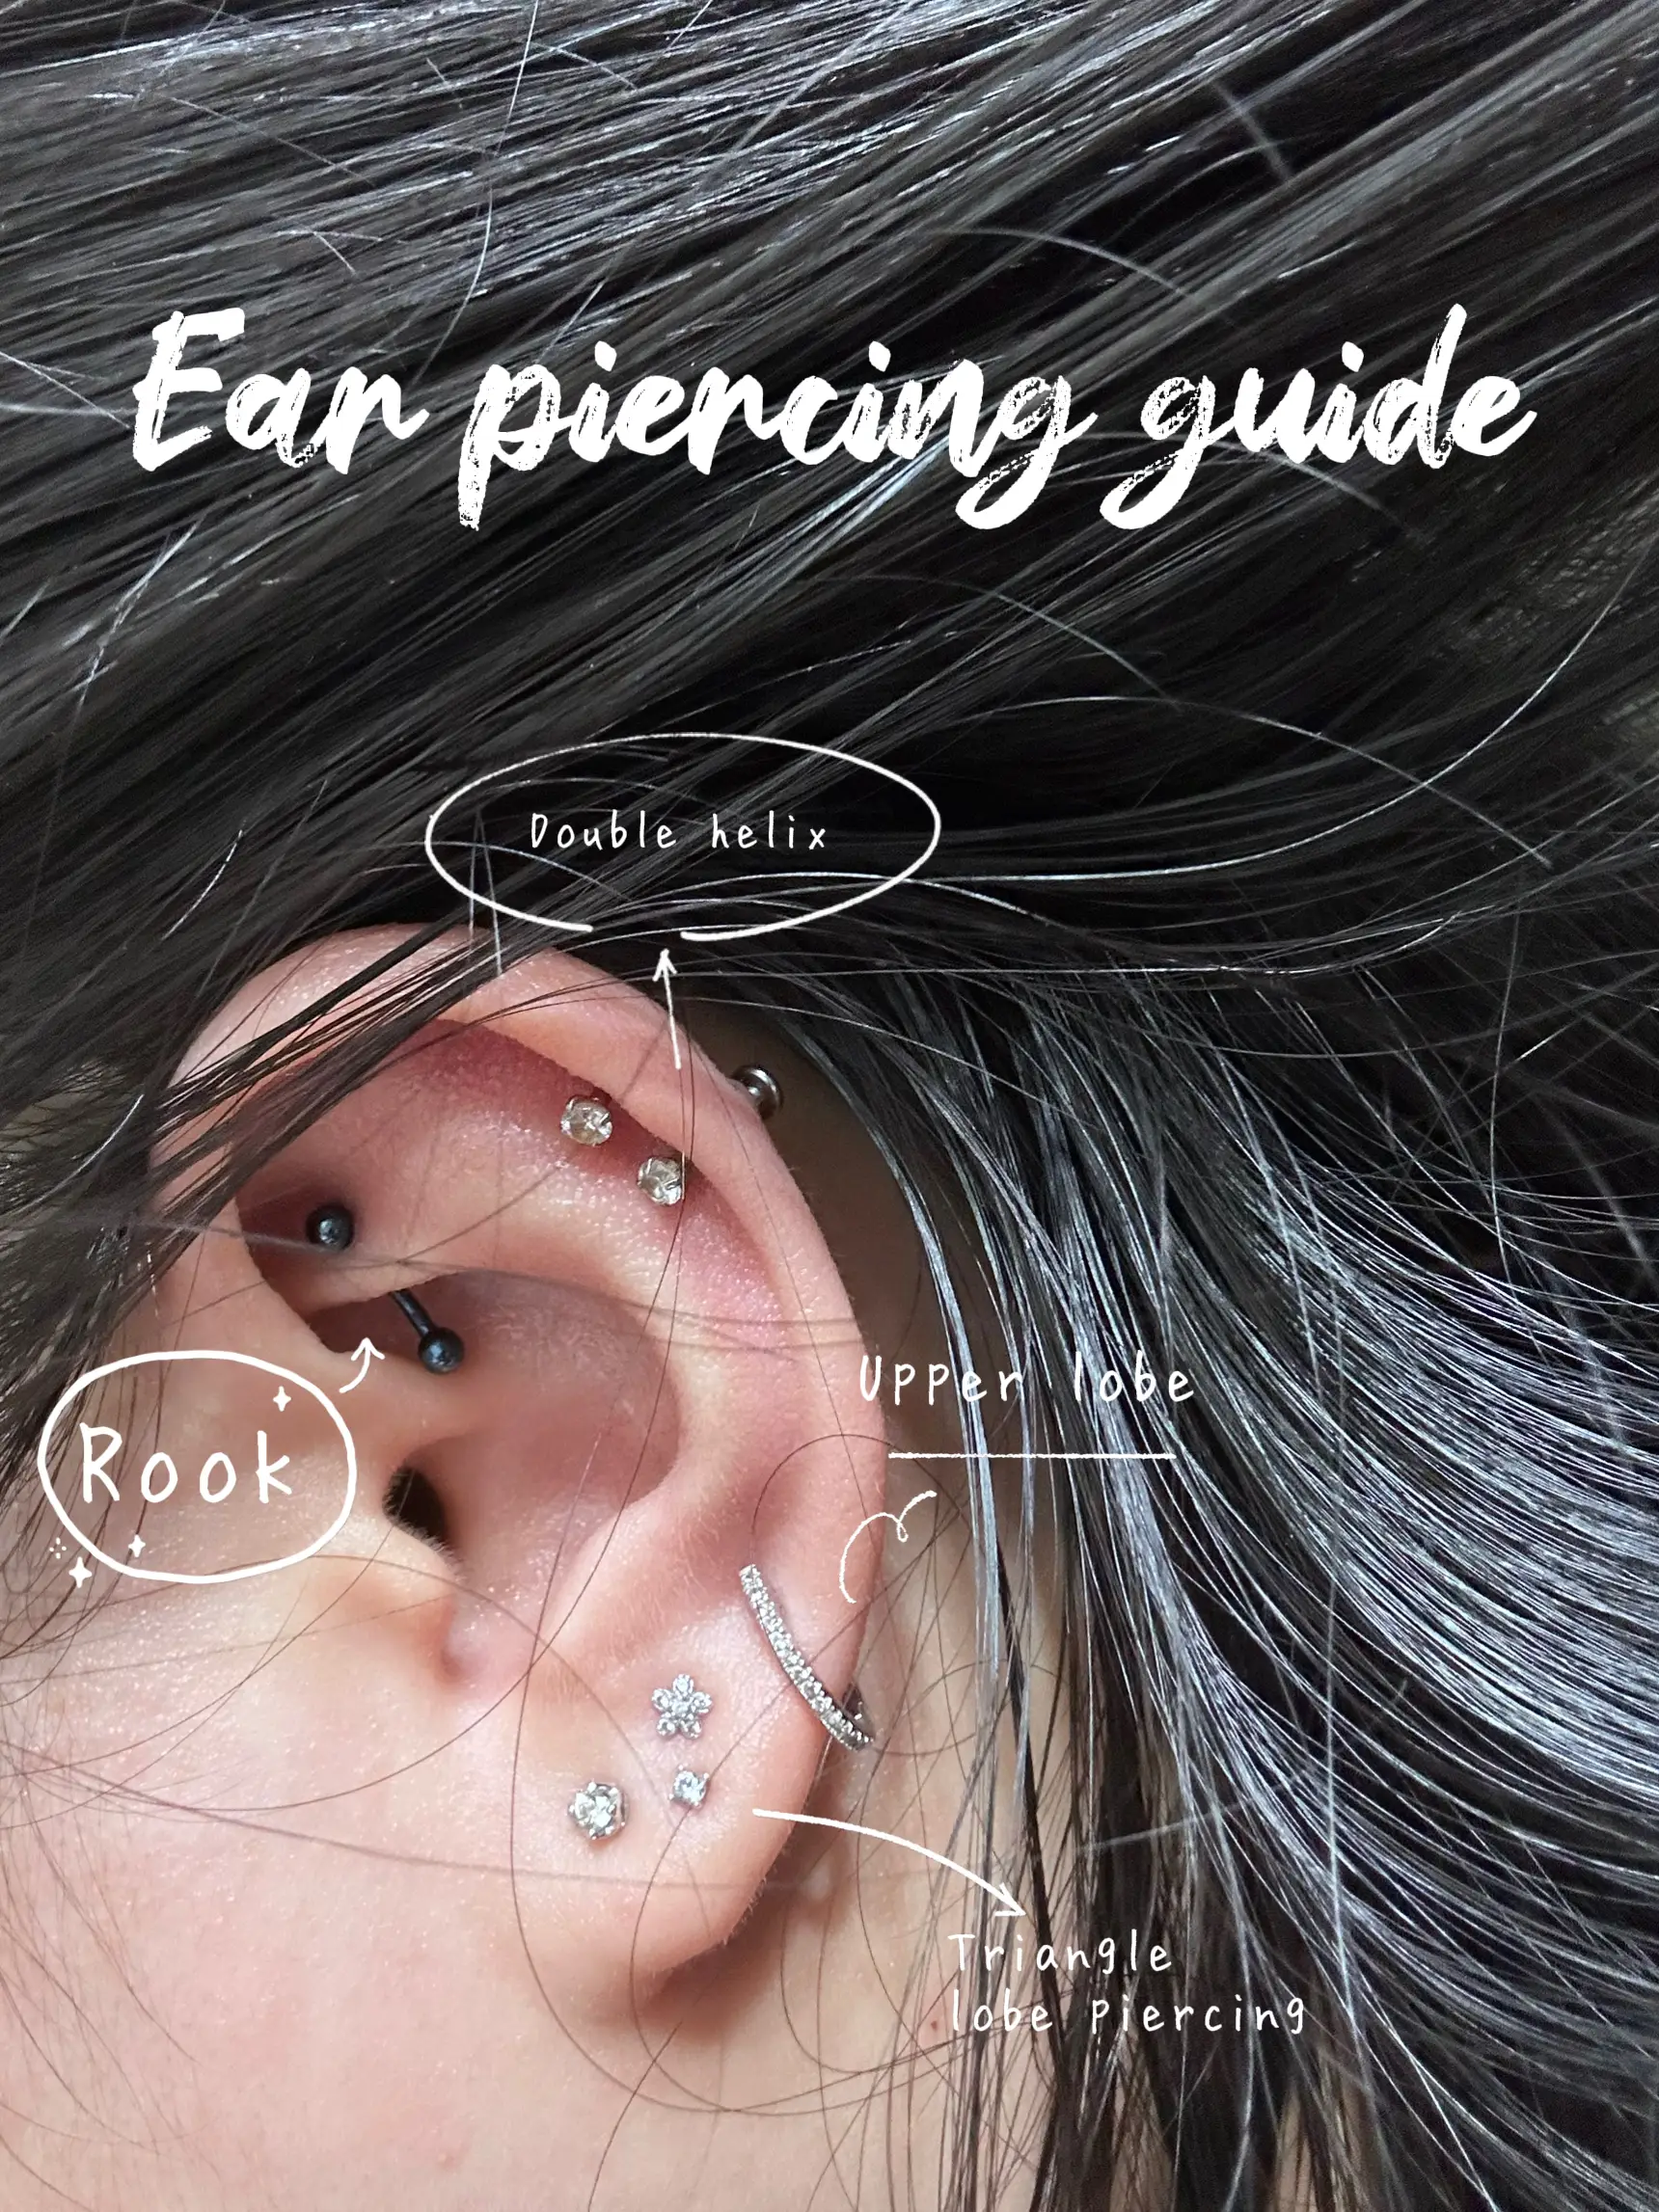 Looking for new piercing ideas! Both ears are pretty similar. “Star” side  is a flat piercing up top and “Moon” side is a helix. I've considered  getting either a forward helix or